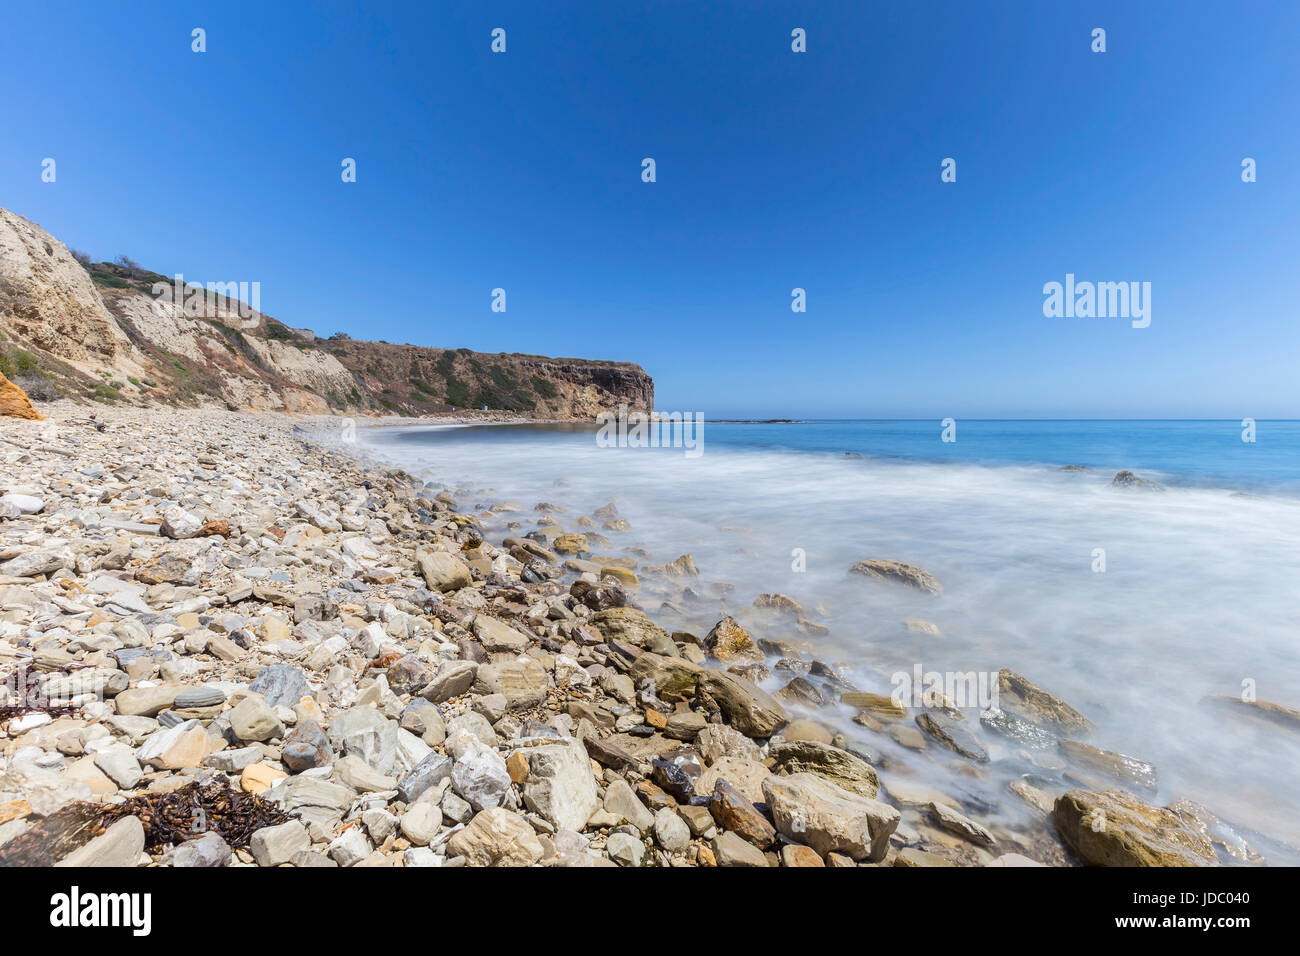 Rocky coast with blurred water motion at Abalone Cove Shoreline Park in Ranch Palos Verdes, California. Stock Photo